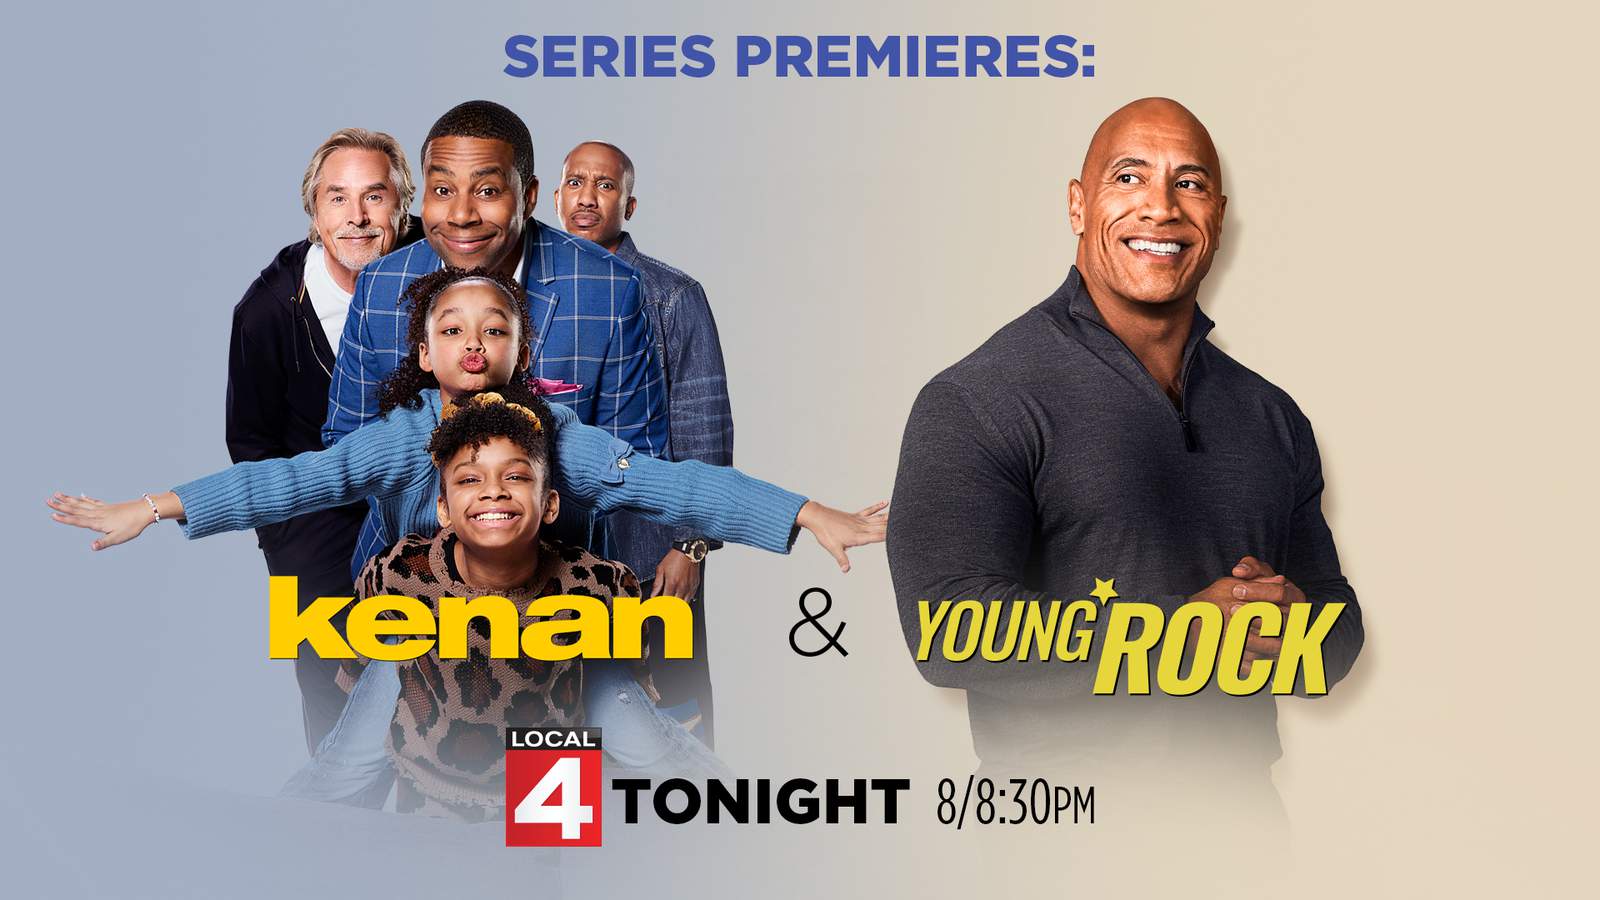 Catch the season premieres of ‘Young Rock’ and ‘Kenan’ tonight!